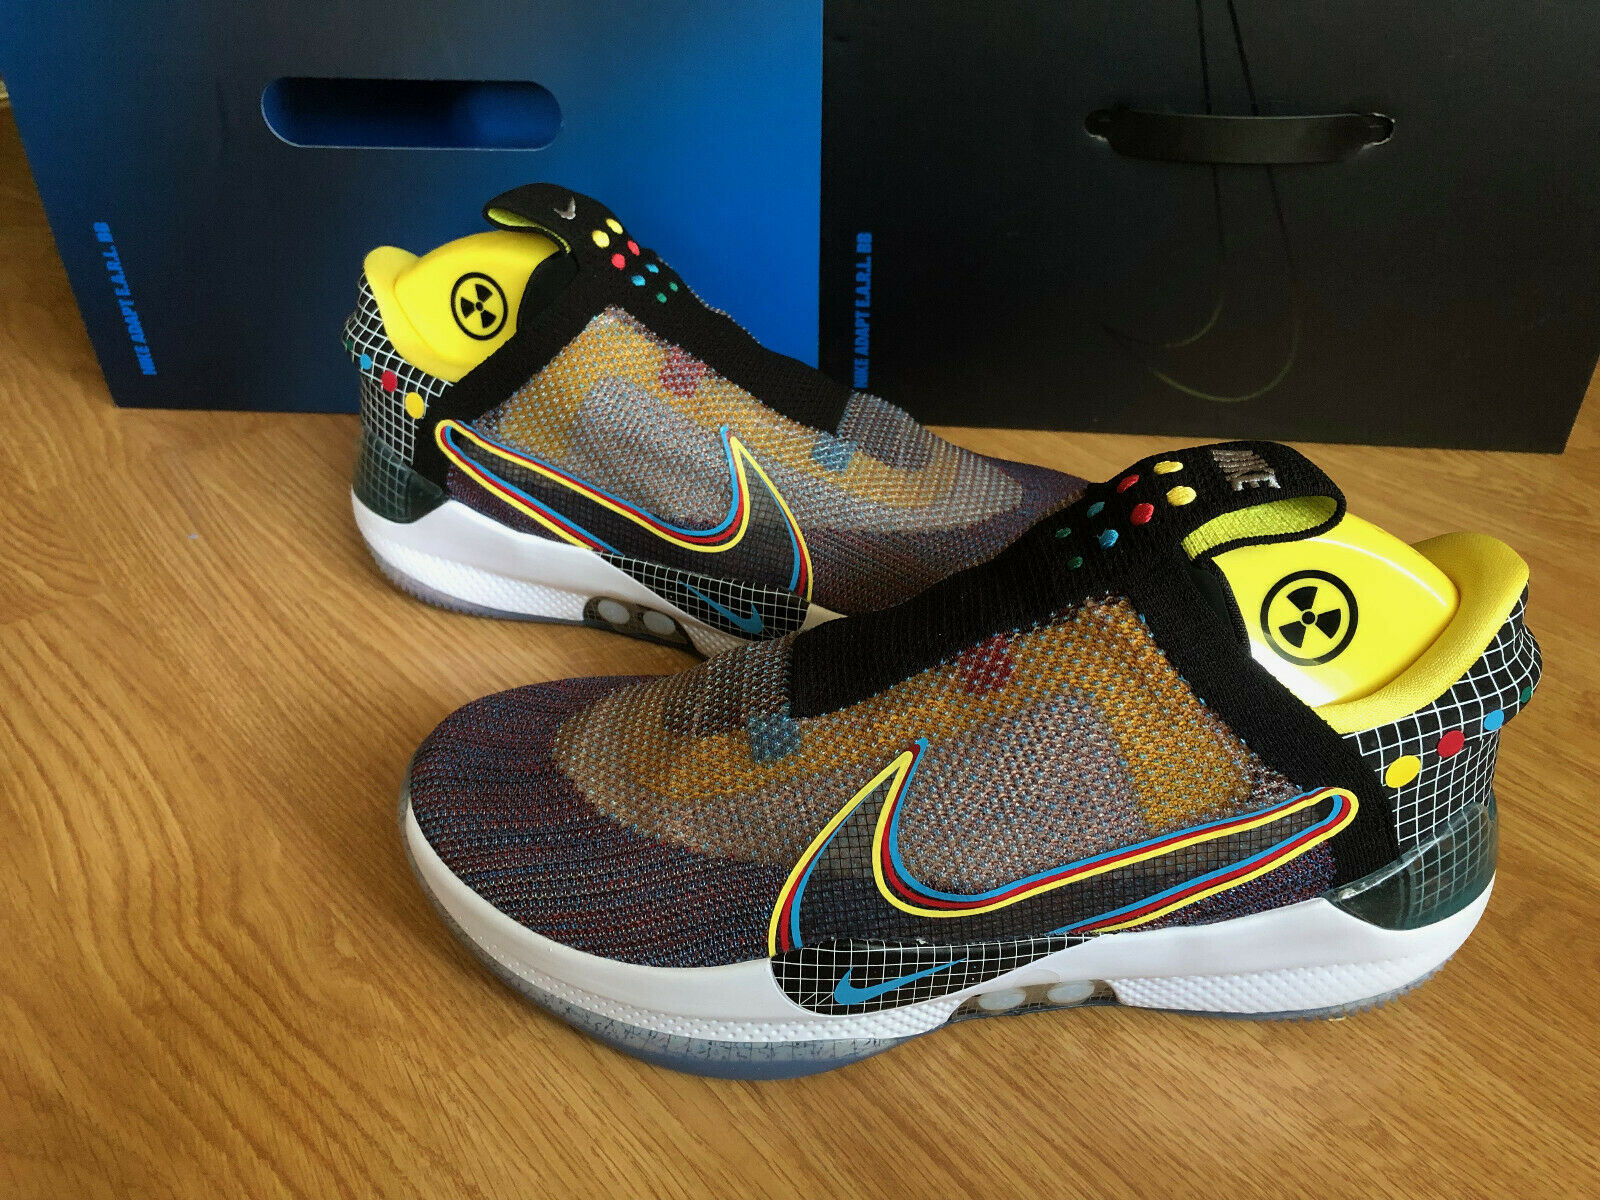 Nike Adapt BB Multi-Color US Charger